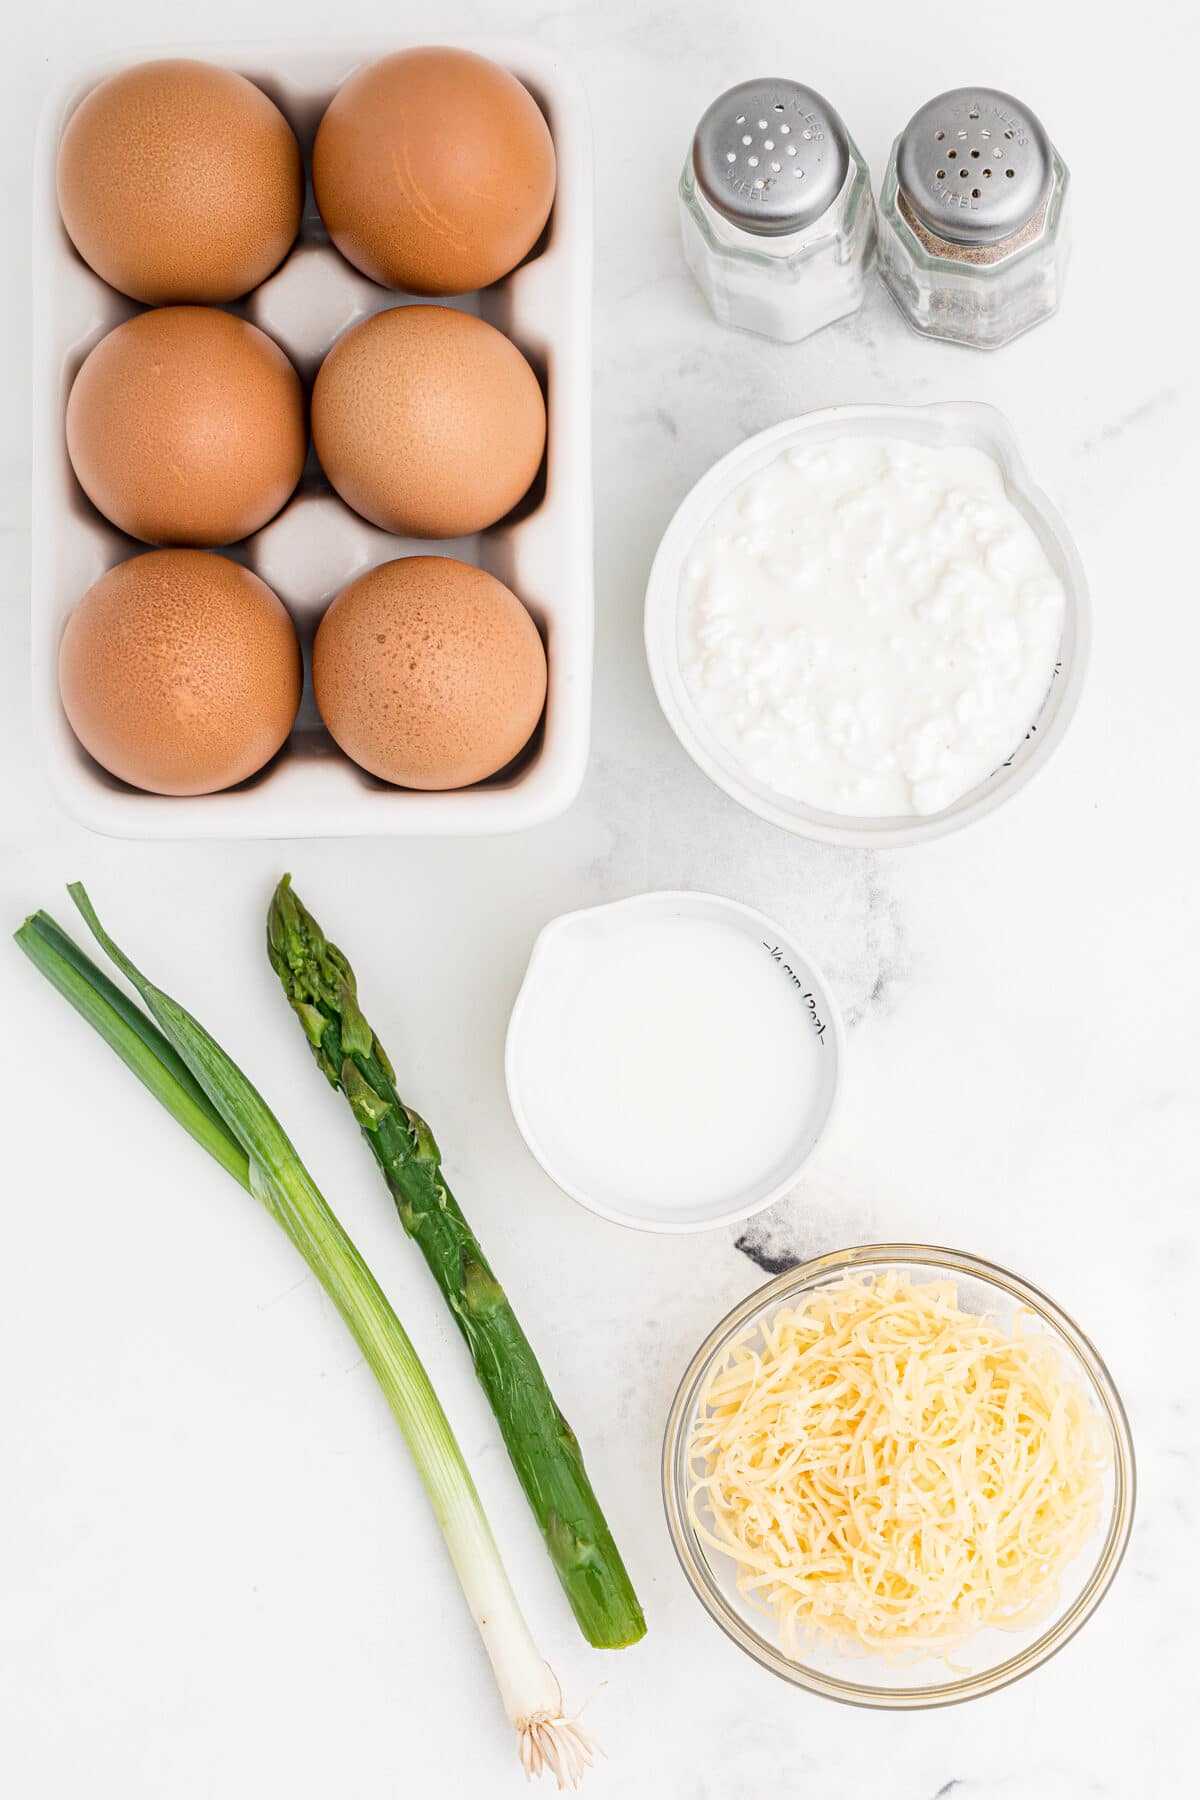 ingredients for french breakfast egg cups, green onion, asparagus, gouda cheese